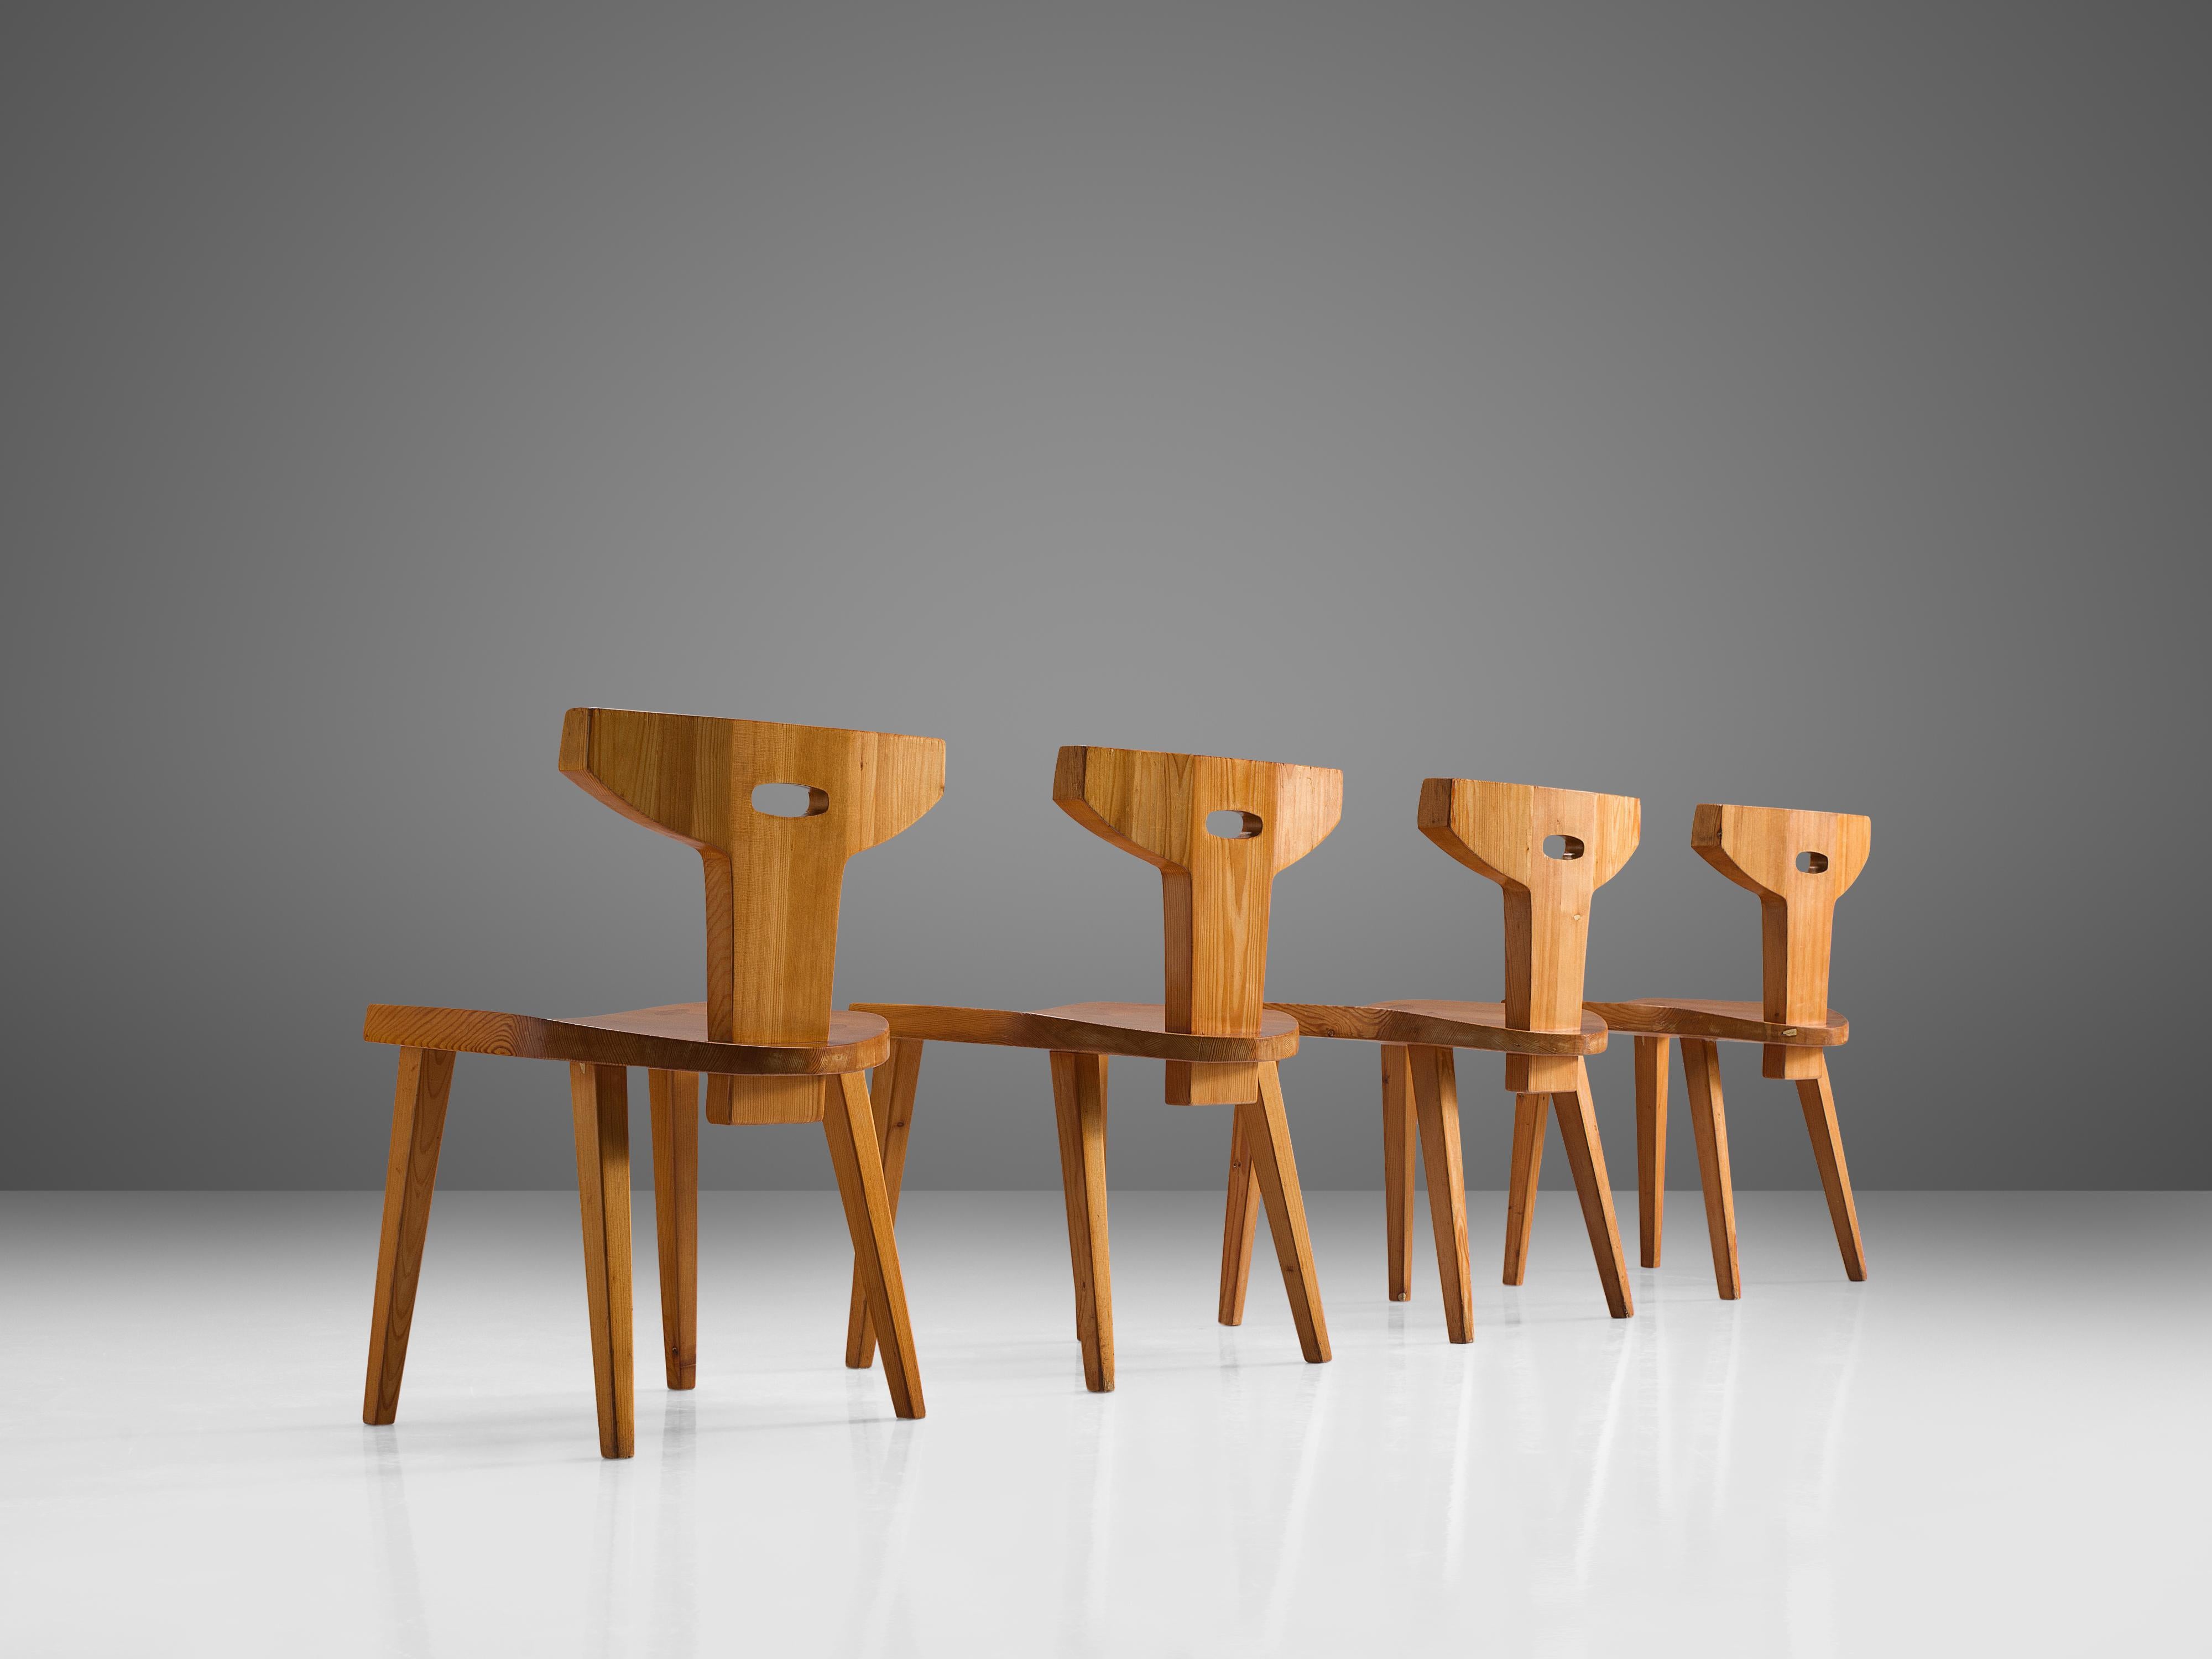 Jacob Kielland-Brandt, set of four dining chairs, solid pine, Denmark, 1960s

This remarkable set holds a strong expression. The backrests have an open look and organically support and optimize the seating comfort. The wood structure has a beautiful